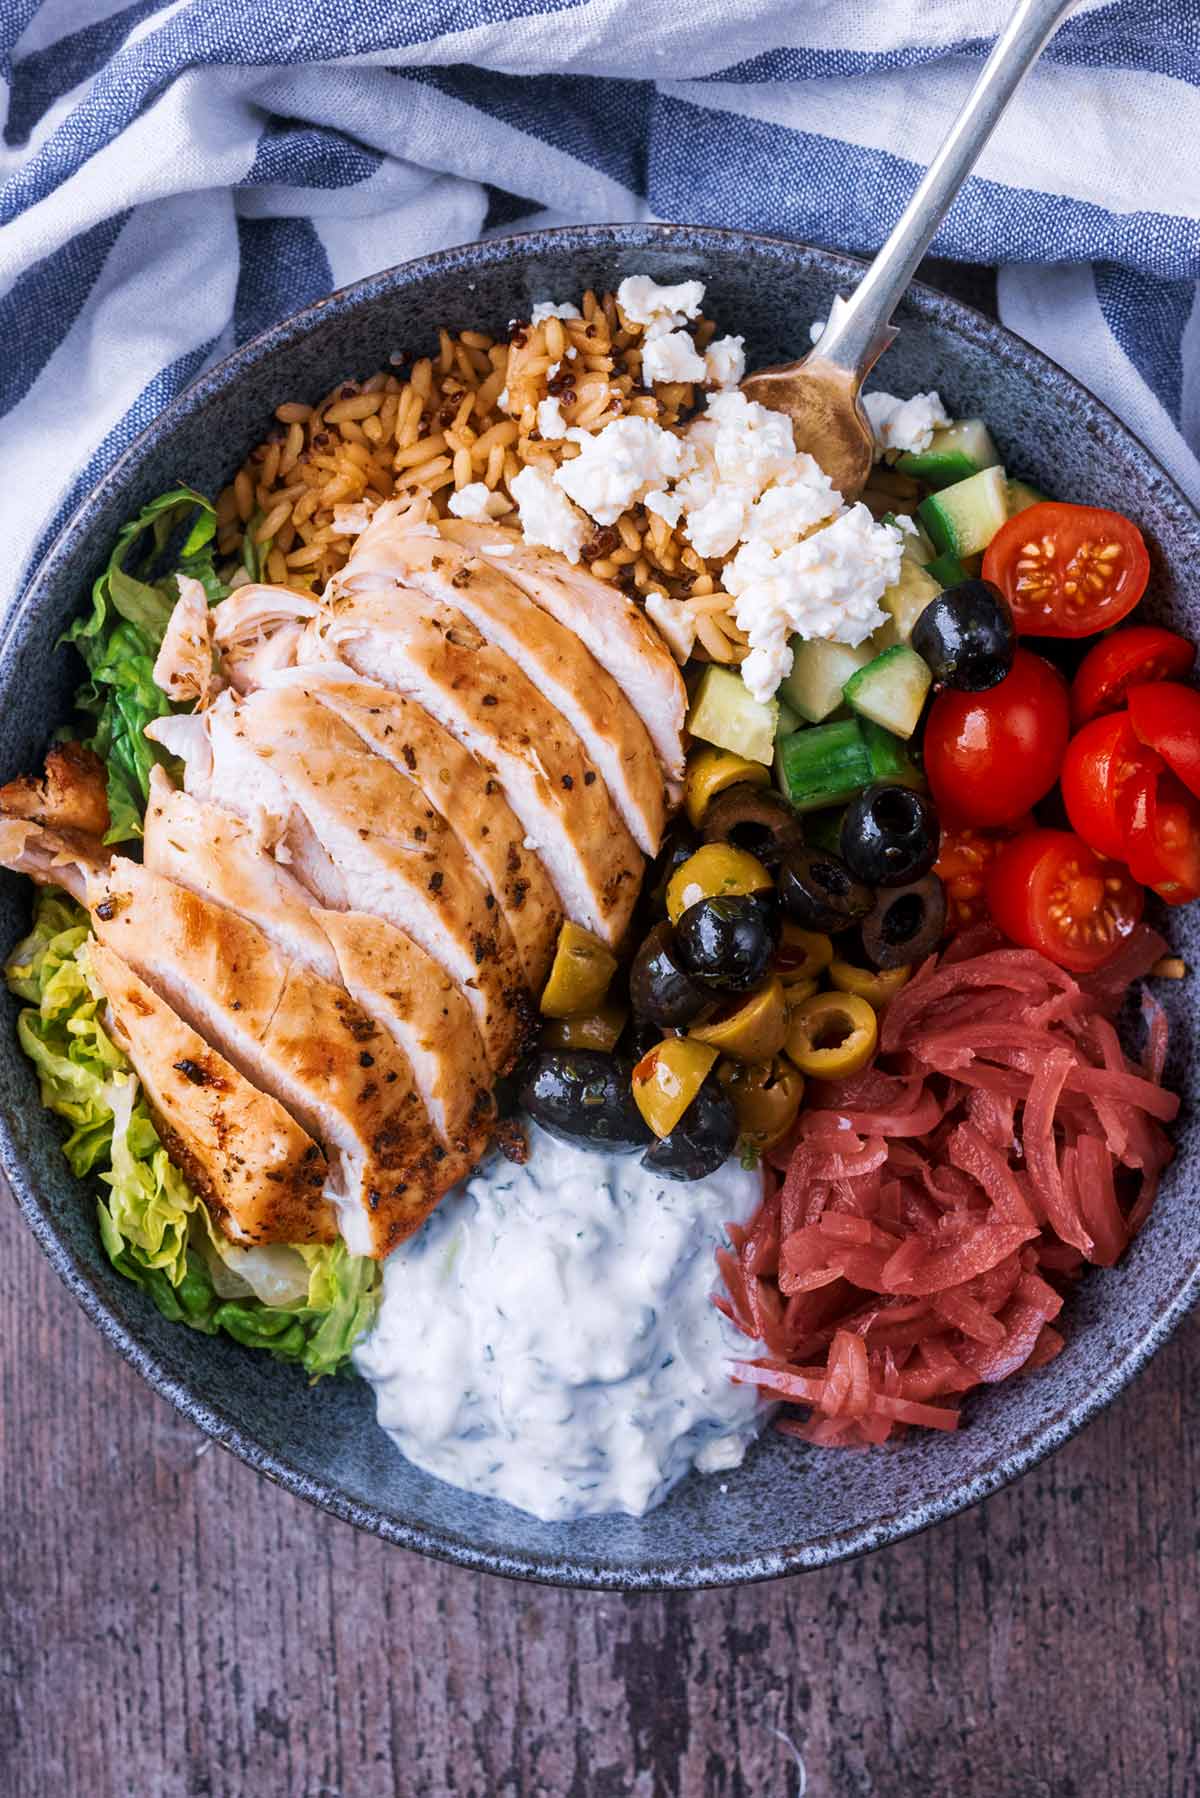 A bowl of salad, sliced chicken, rice and tzatziki.